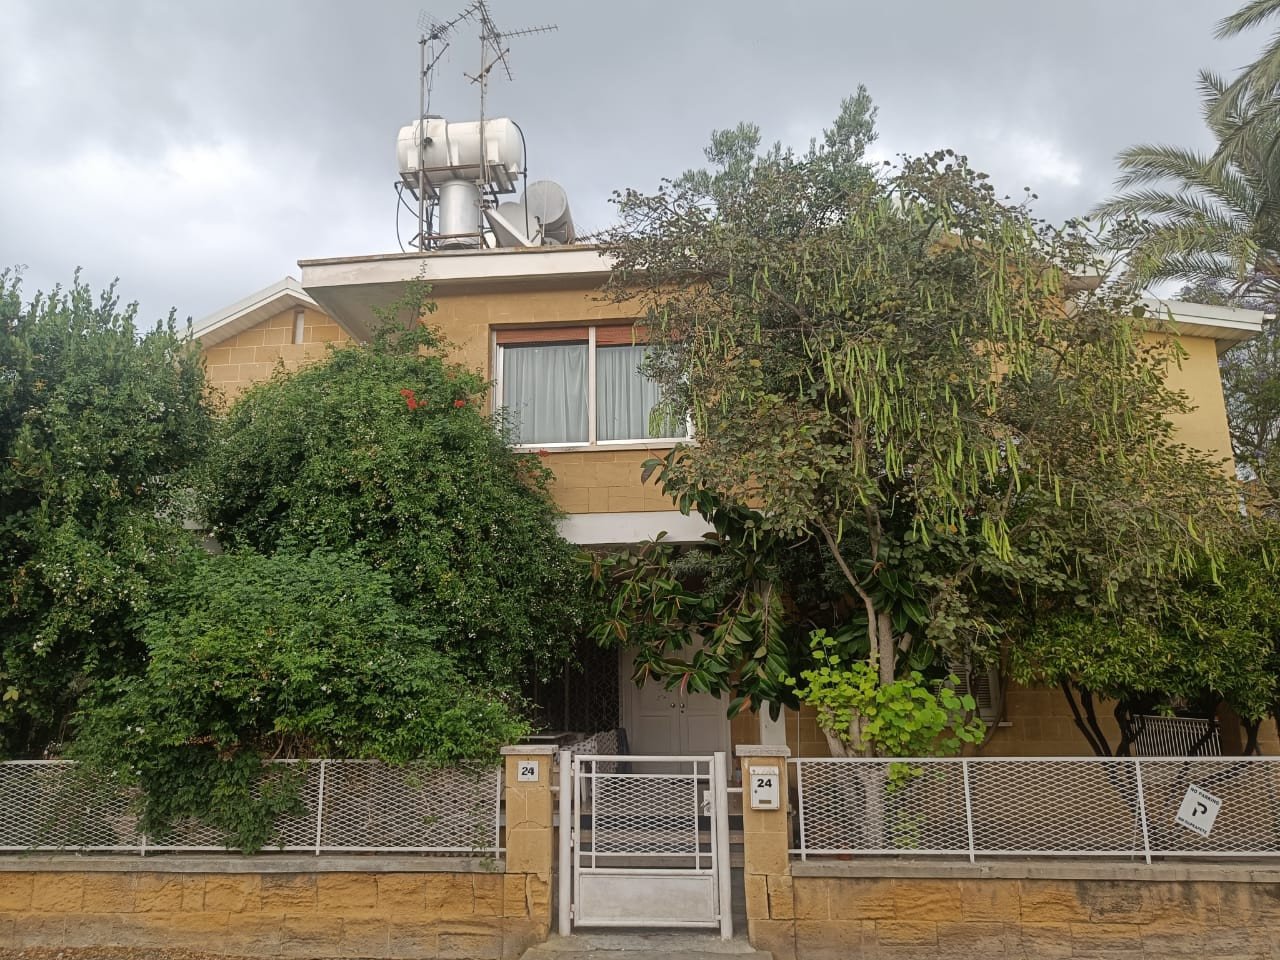 For Rent: Apartments, Agios Andreas, Nicosia, Cyprus FC-38861 - #2